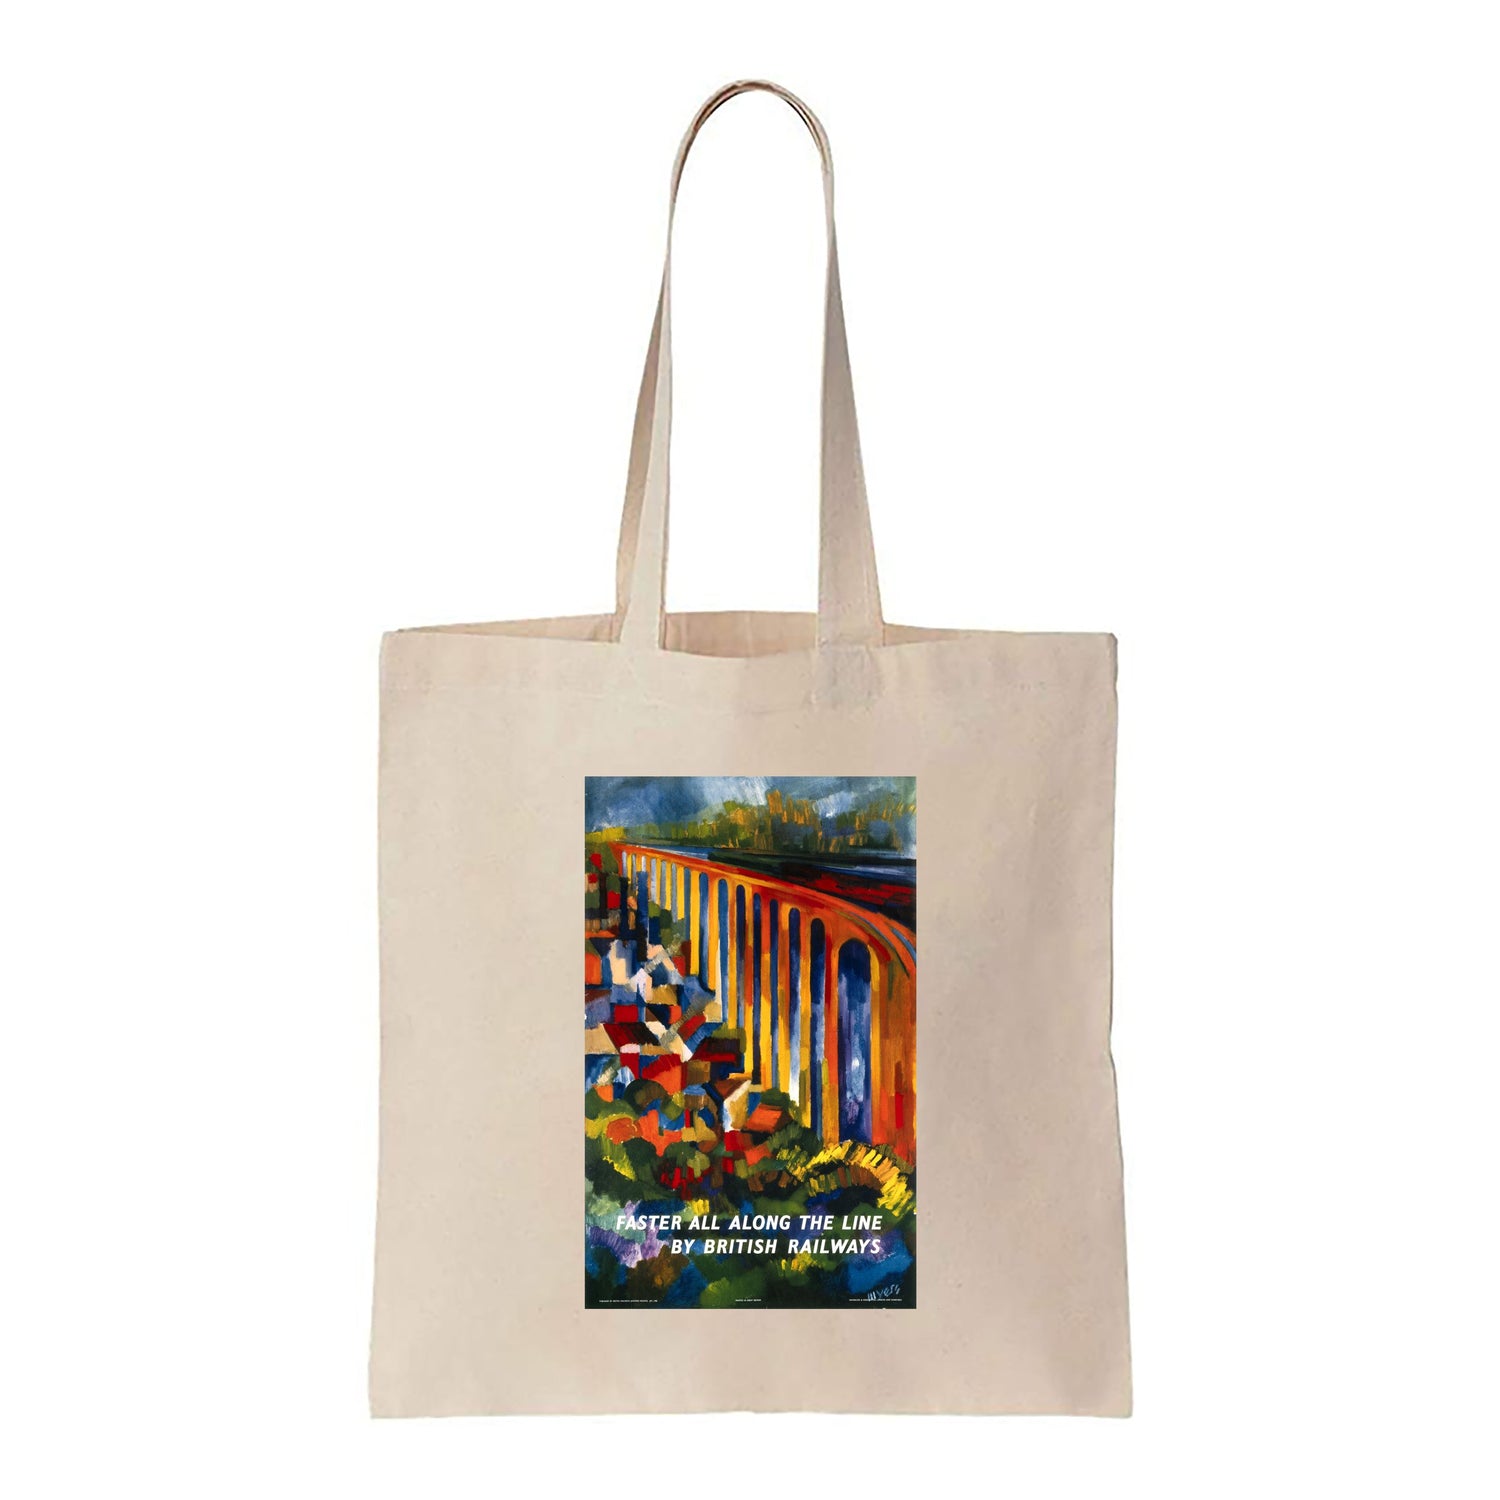 Faster all along the line by British Railways - Canvas Tote Bag